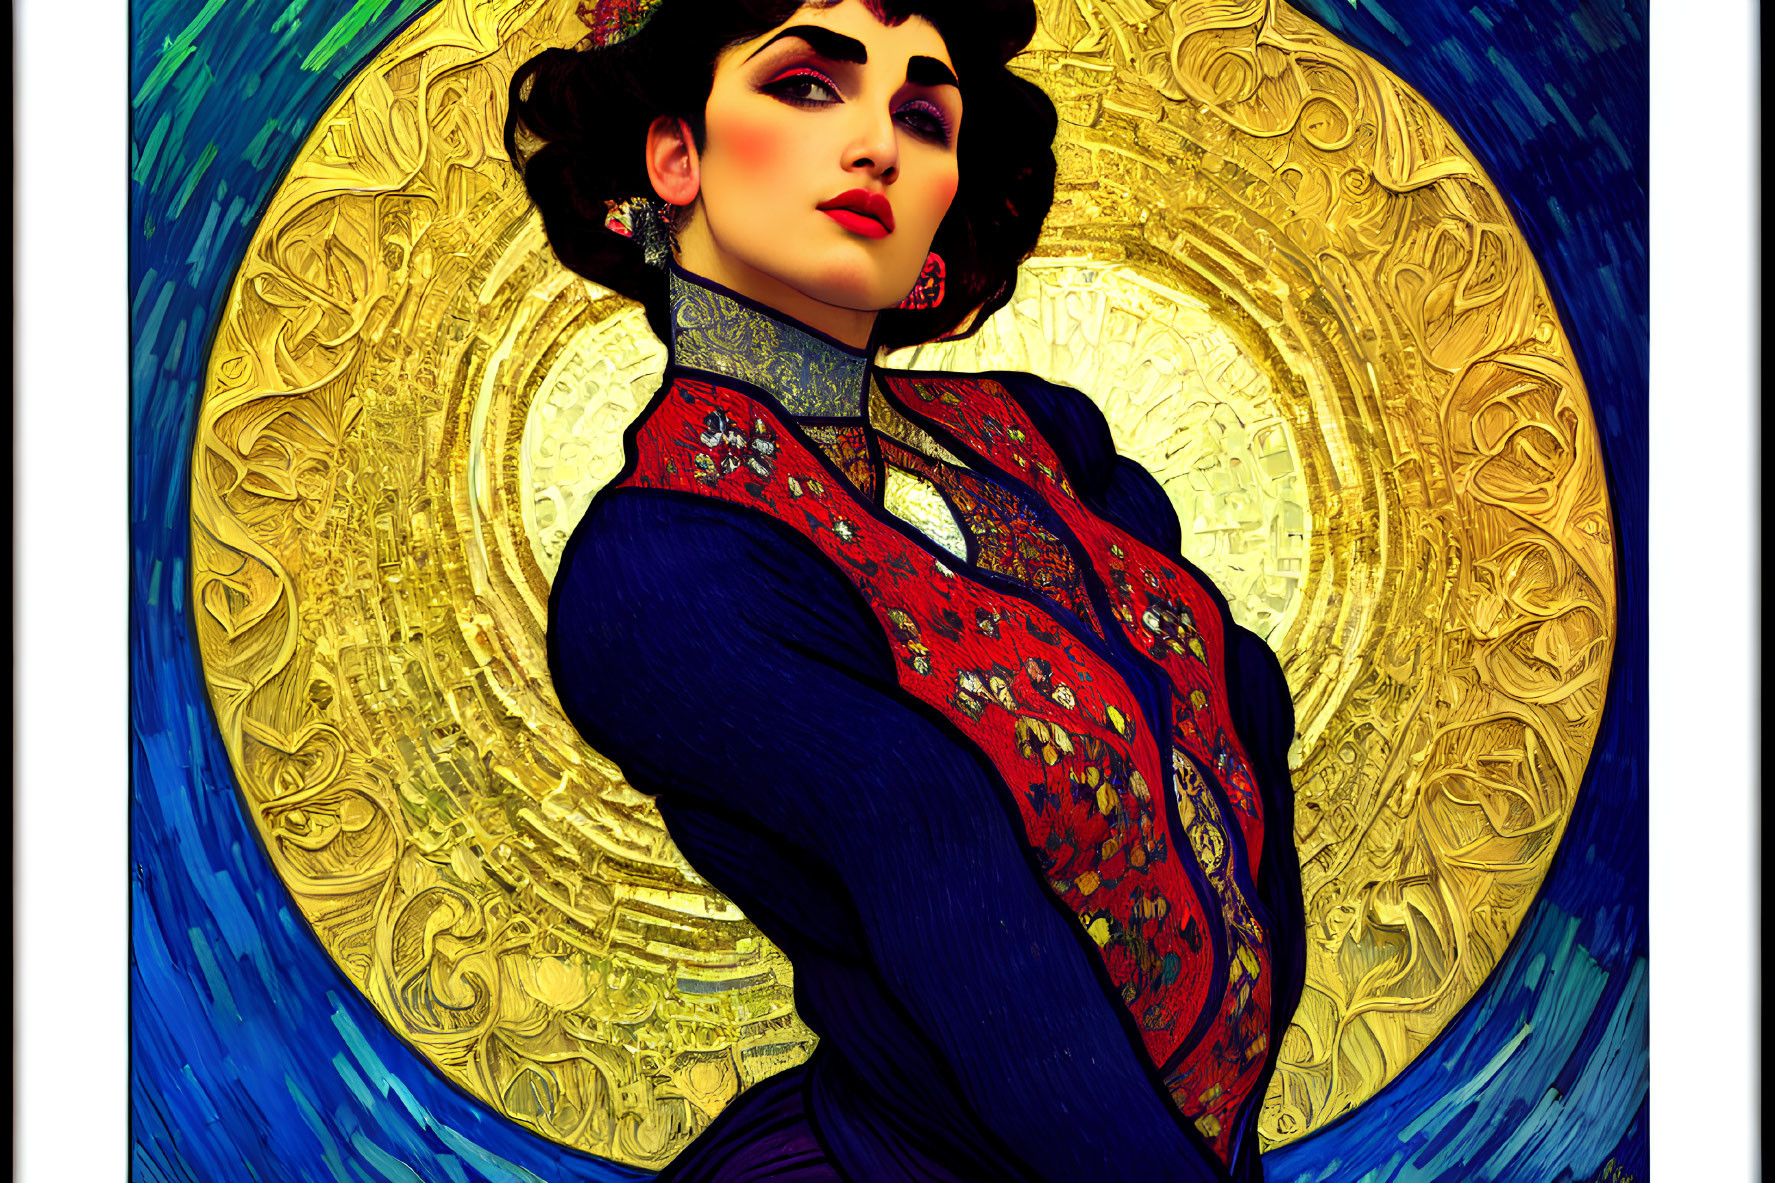 Illustration of woman in blue and red outfit on golden spiral backdrop